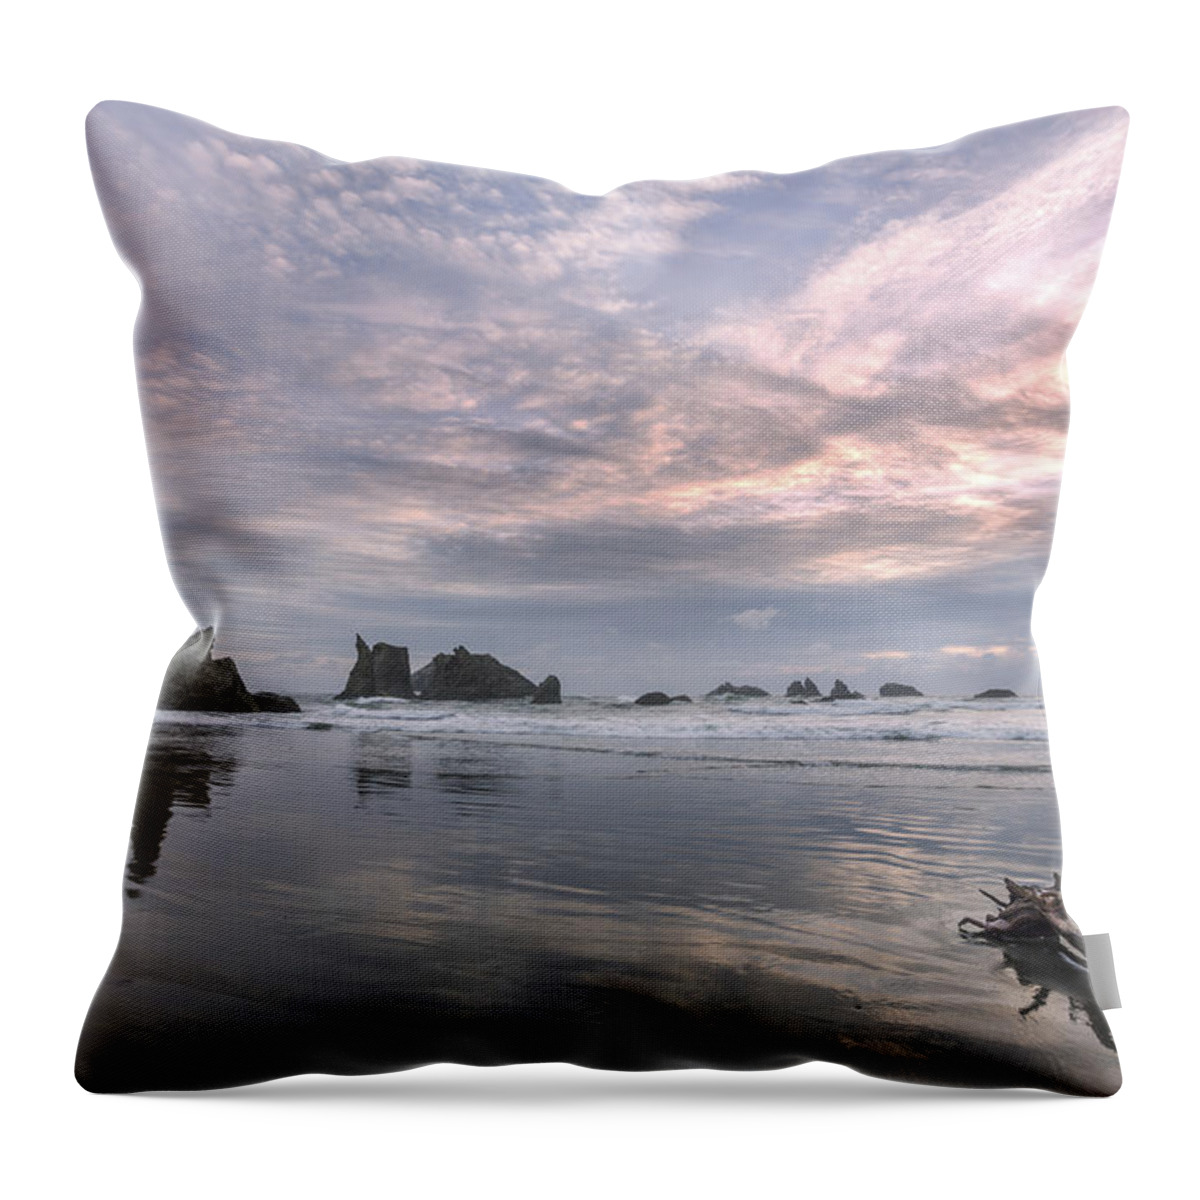 Art Throw Pillow featuring the photograph Finding Reflections by Jon Glaser